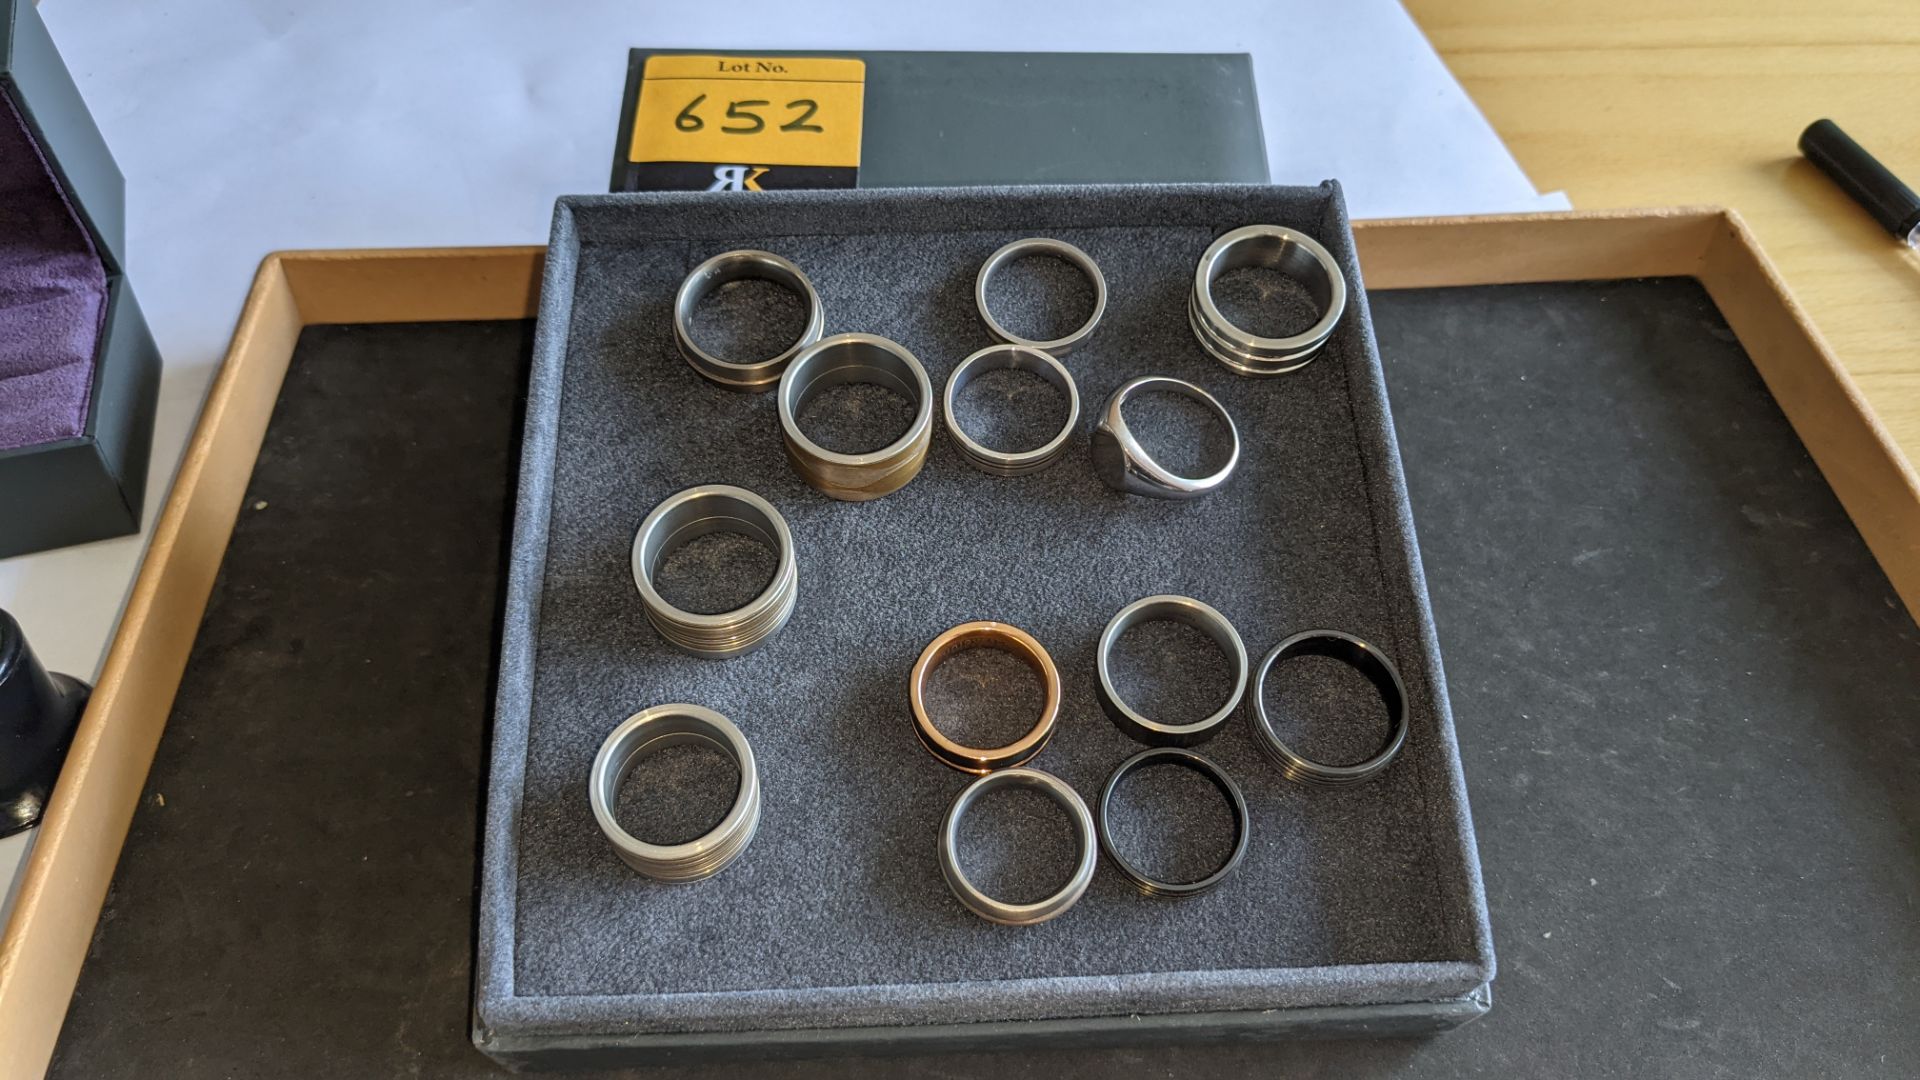 13 assorted men's rings. Understood to be made of a variety of materials including silver, stainless